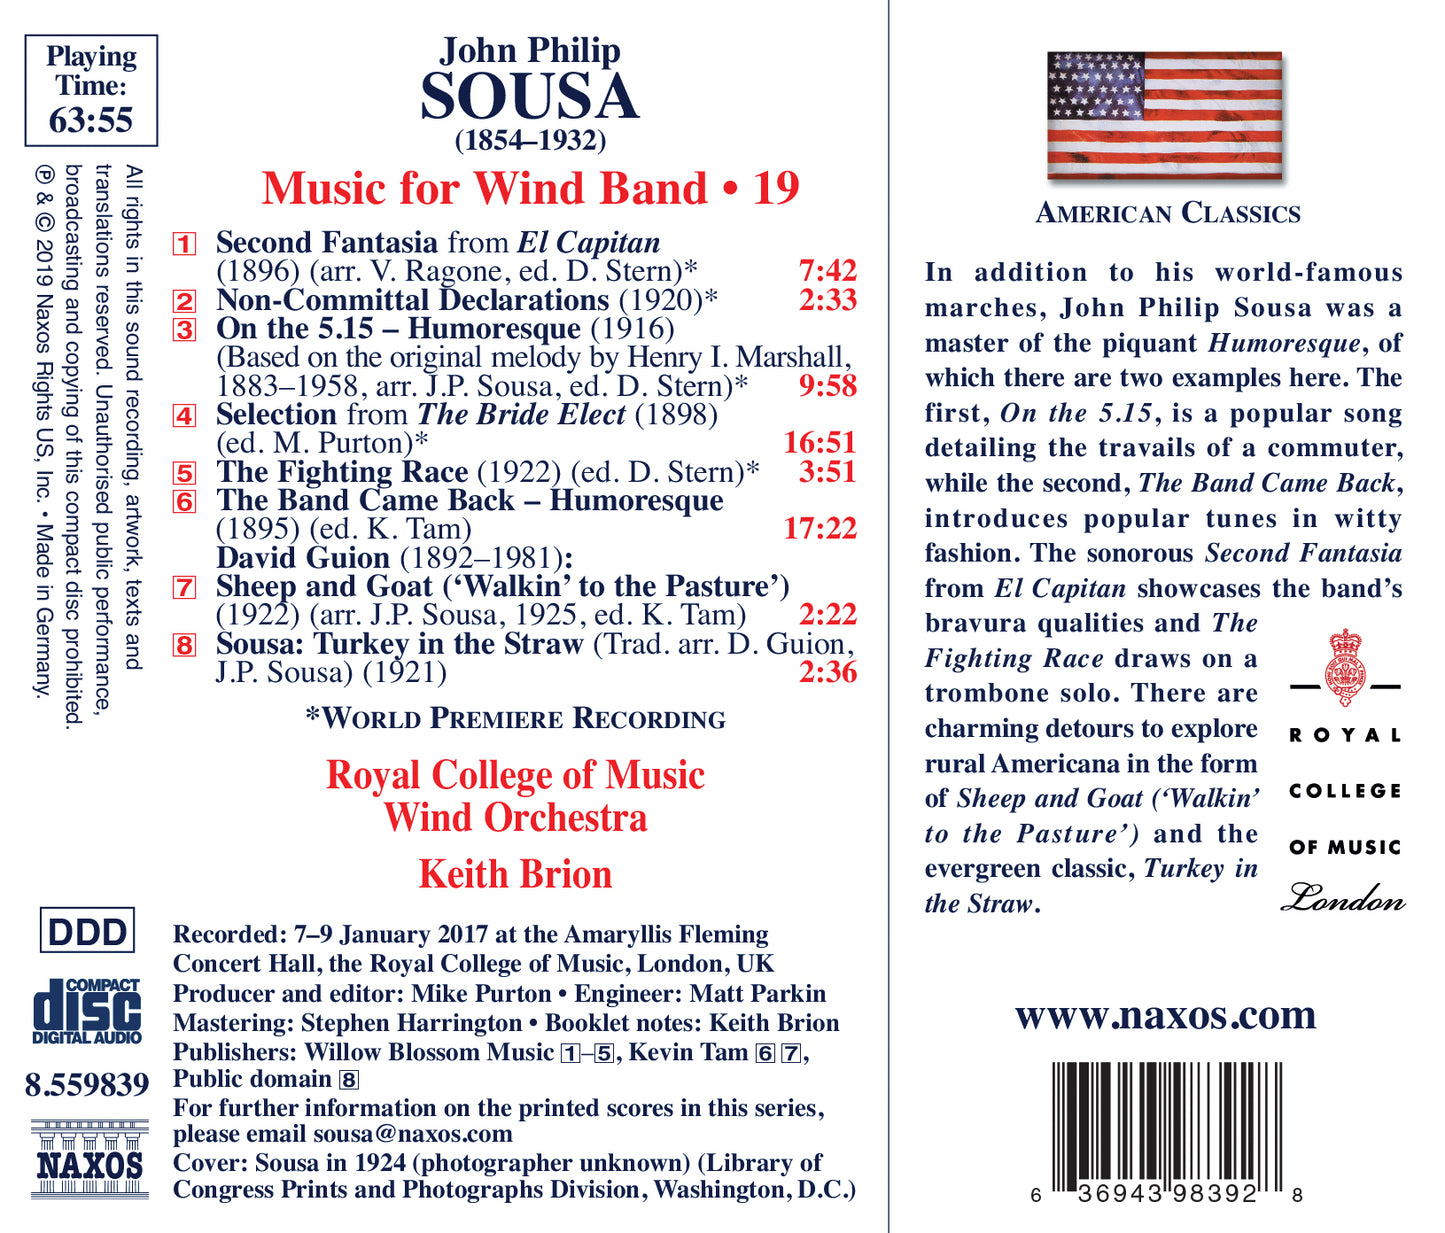 Sousa: Music For Wind Band, Vol. 19